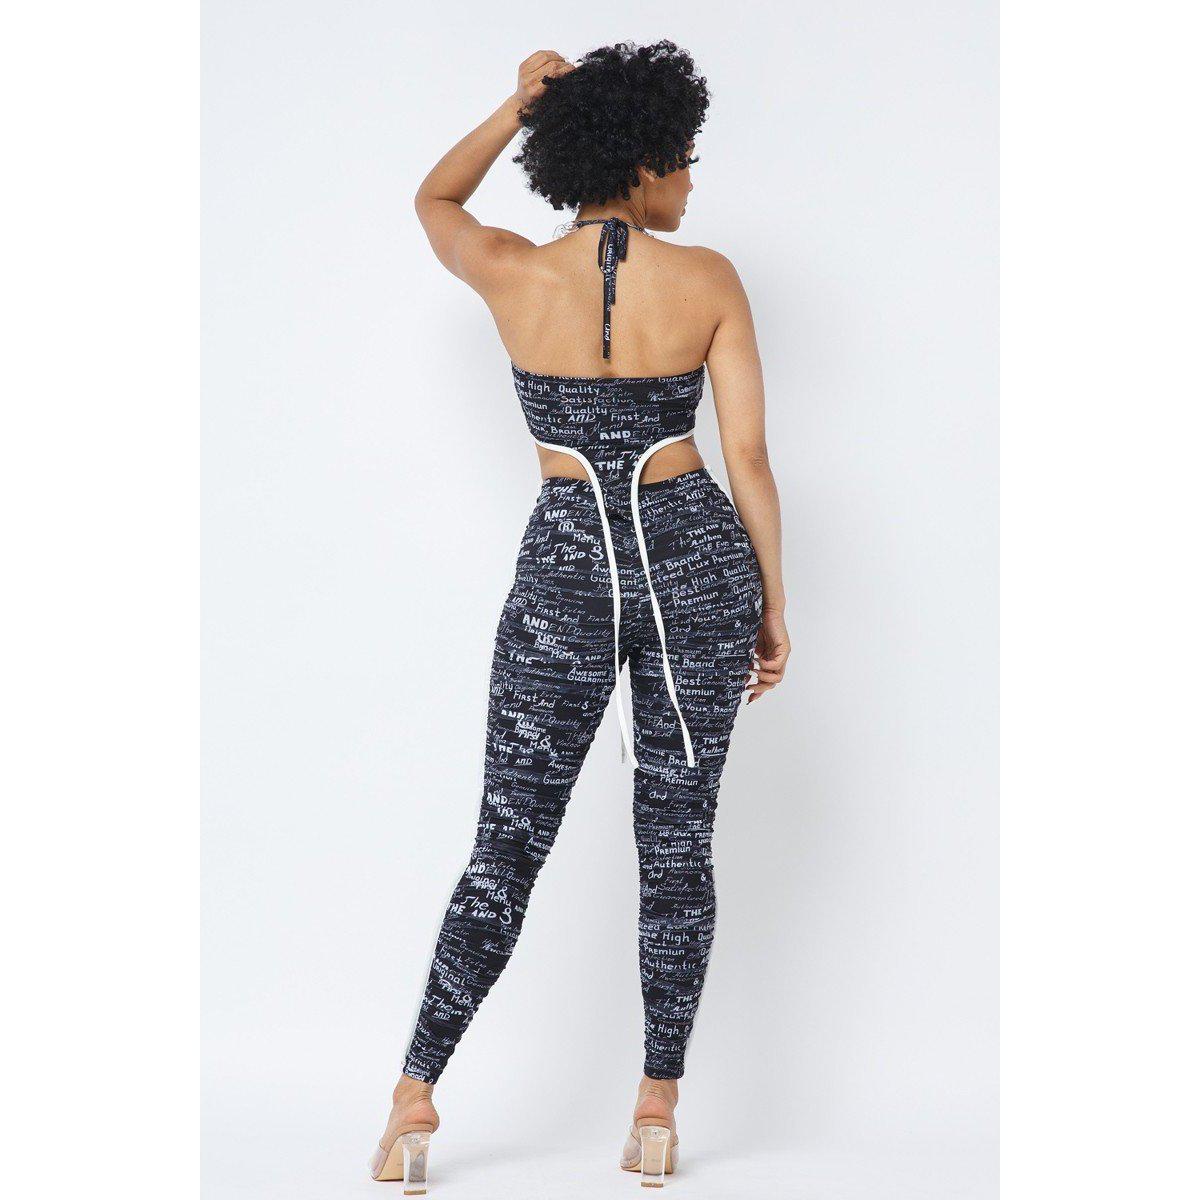 Mesh Print Crop Top With Plastic Chain Halter Neck With Matching Leggings-Pant Top Sets-NXTLVLNYC